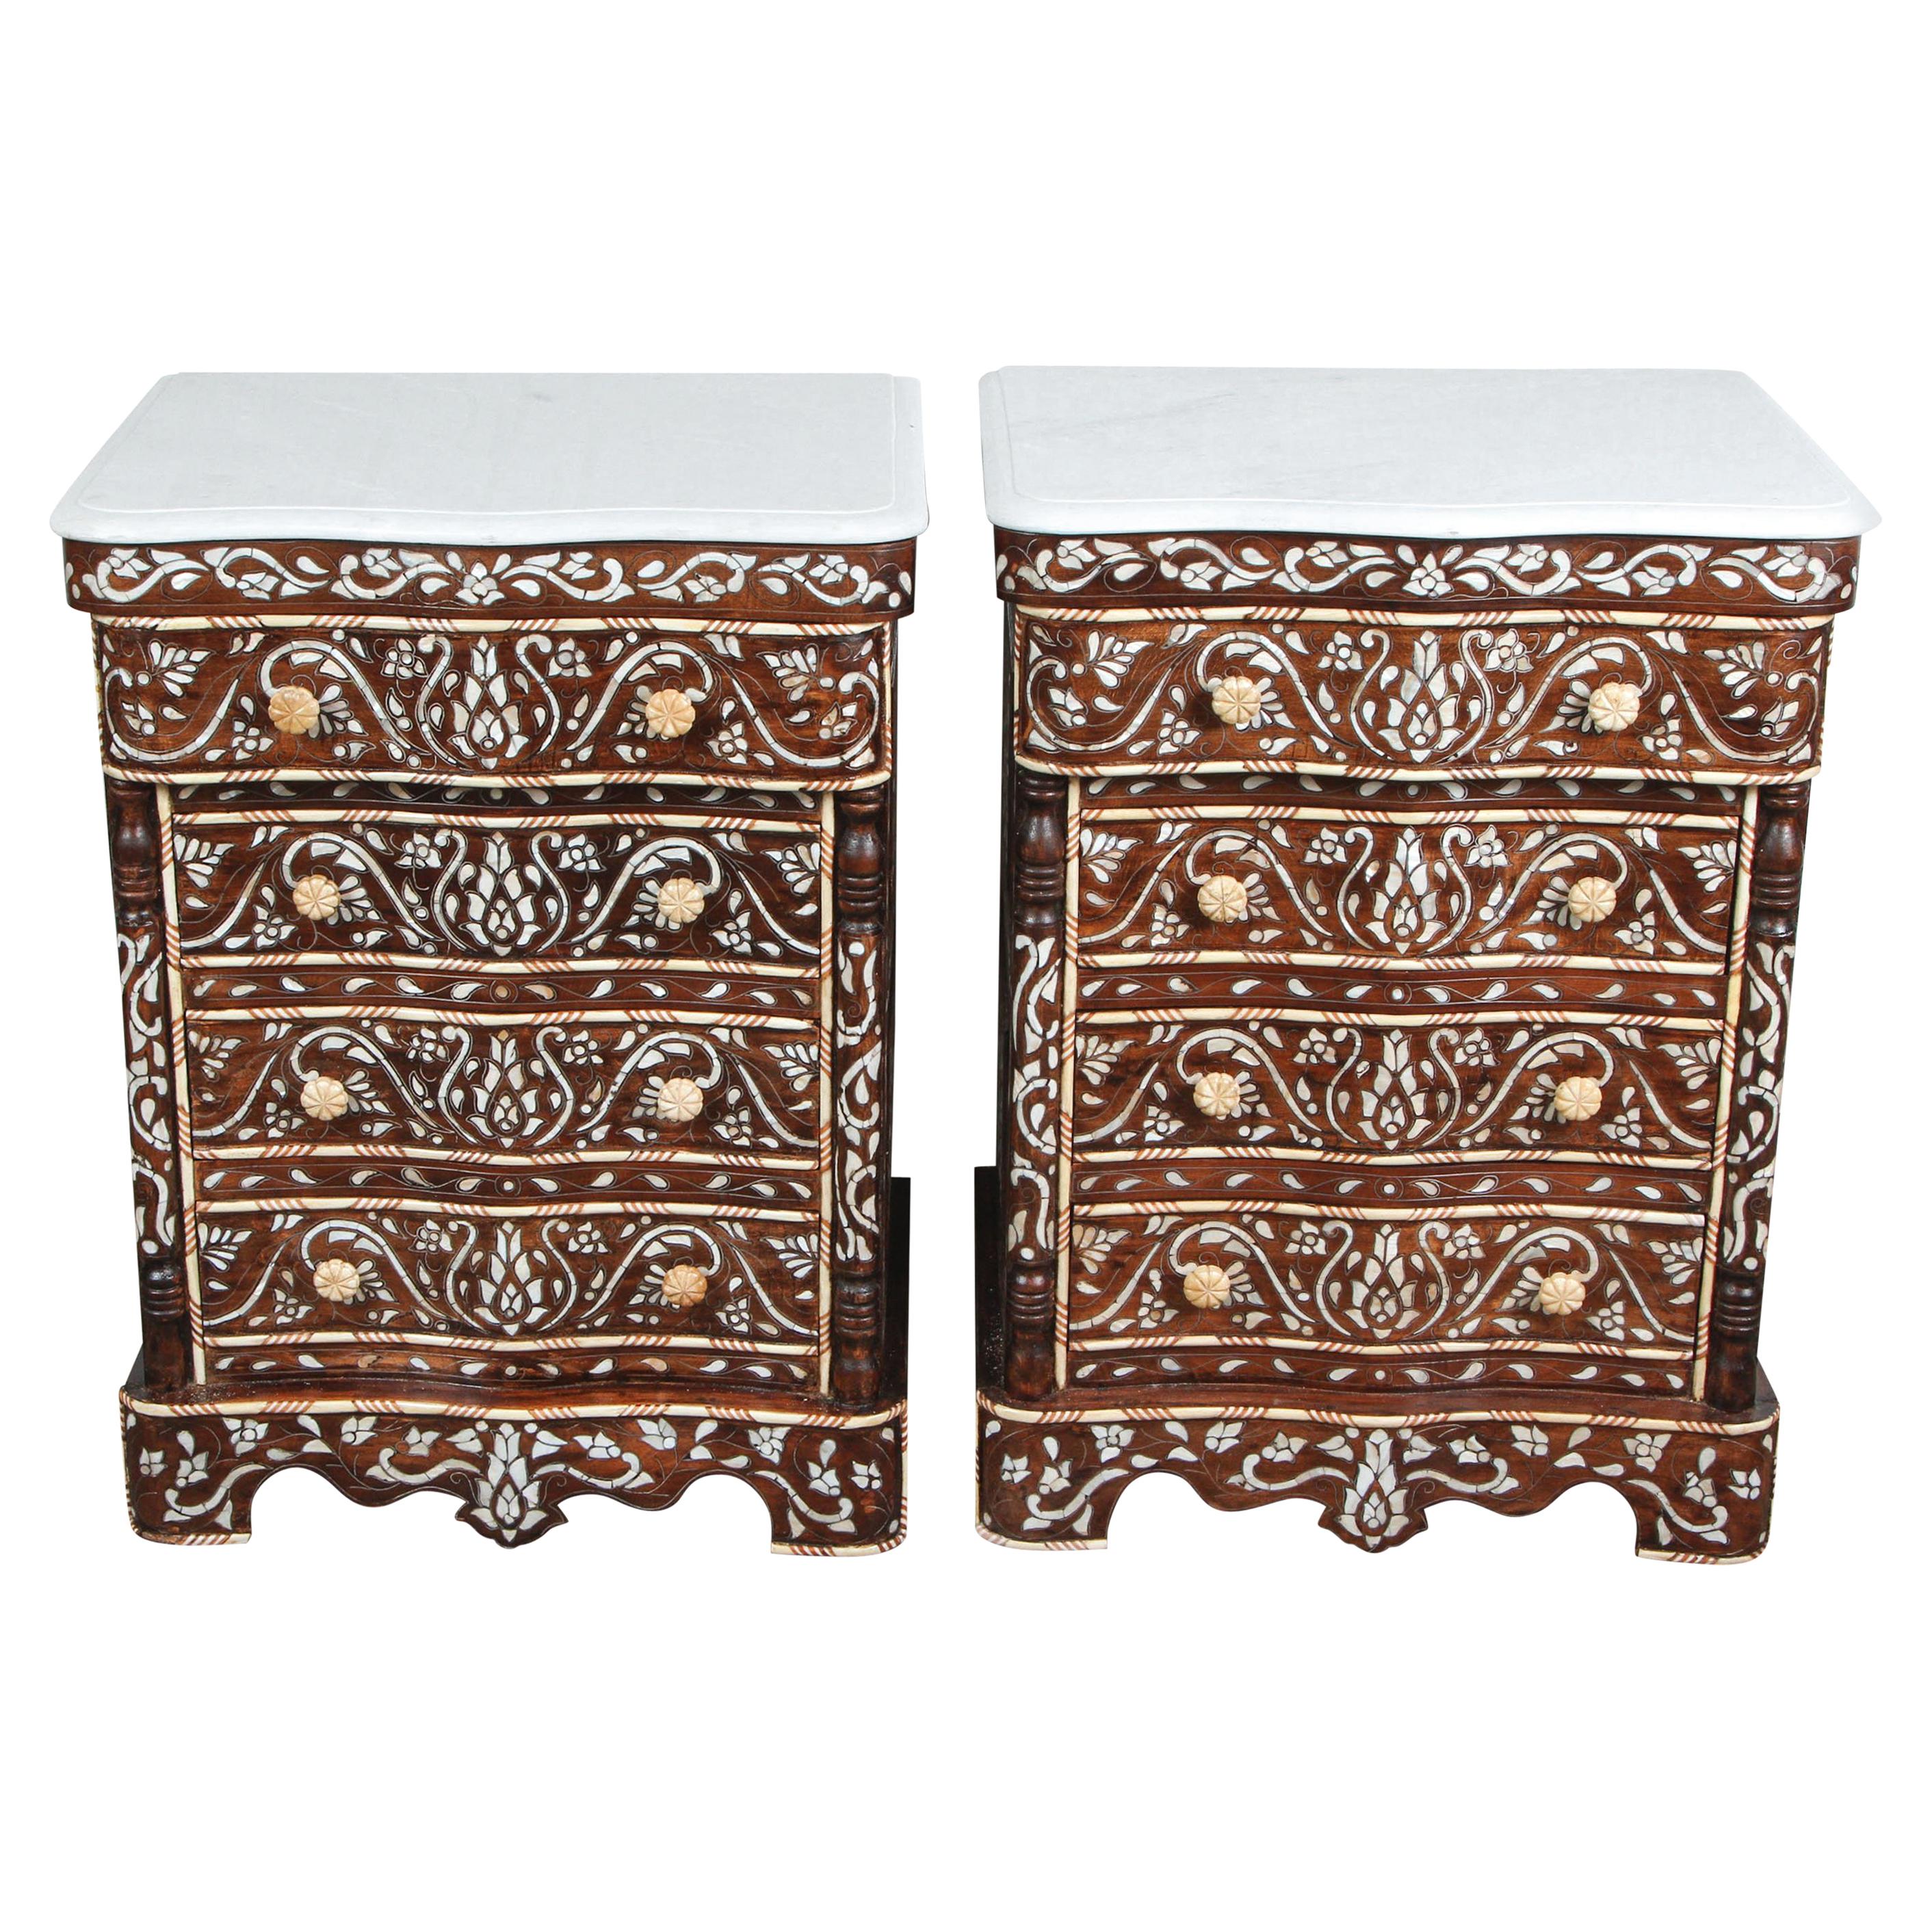 Pair of Syrian Mother of Pearl Inlay Nightstands